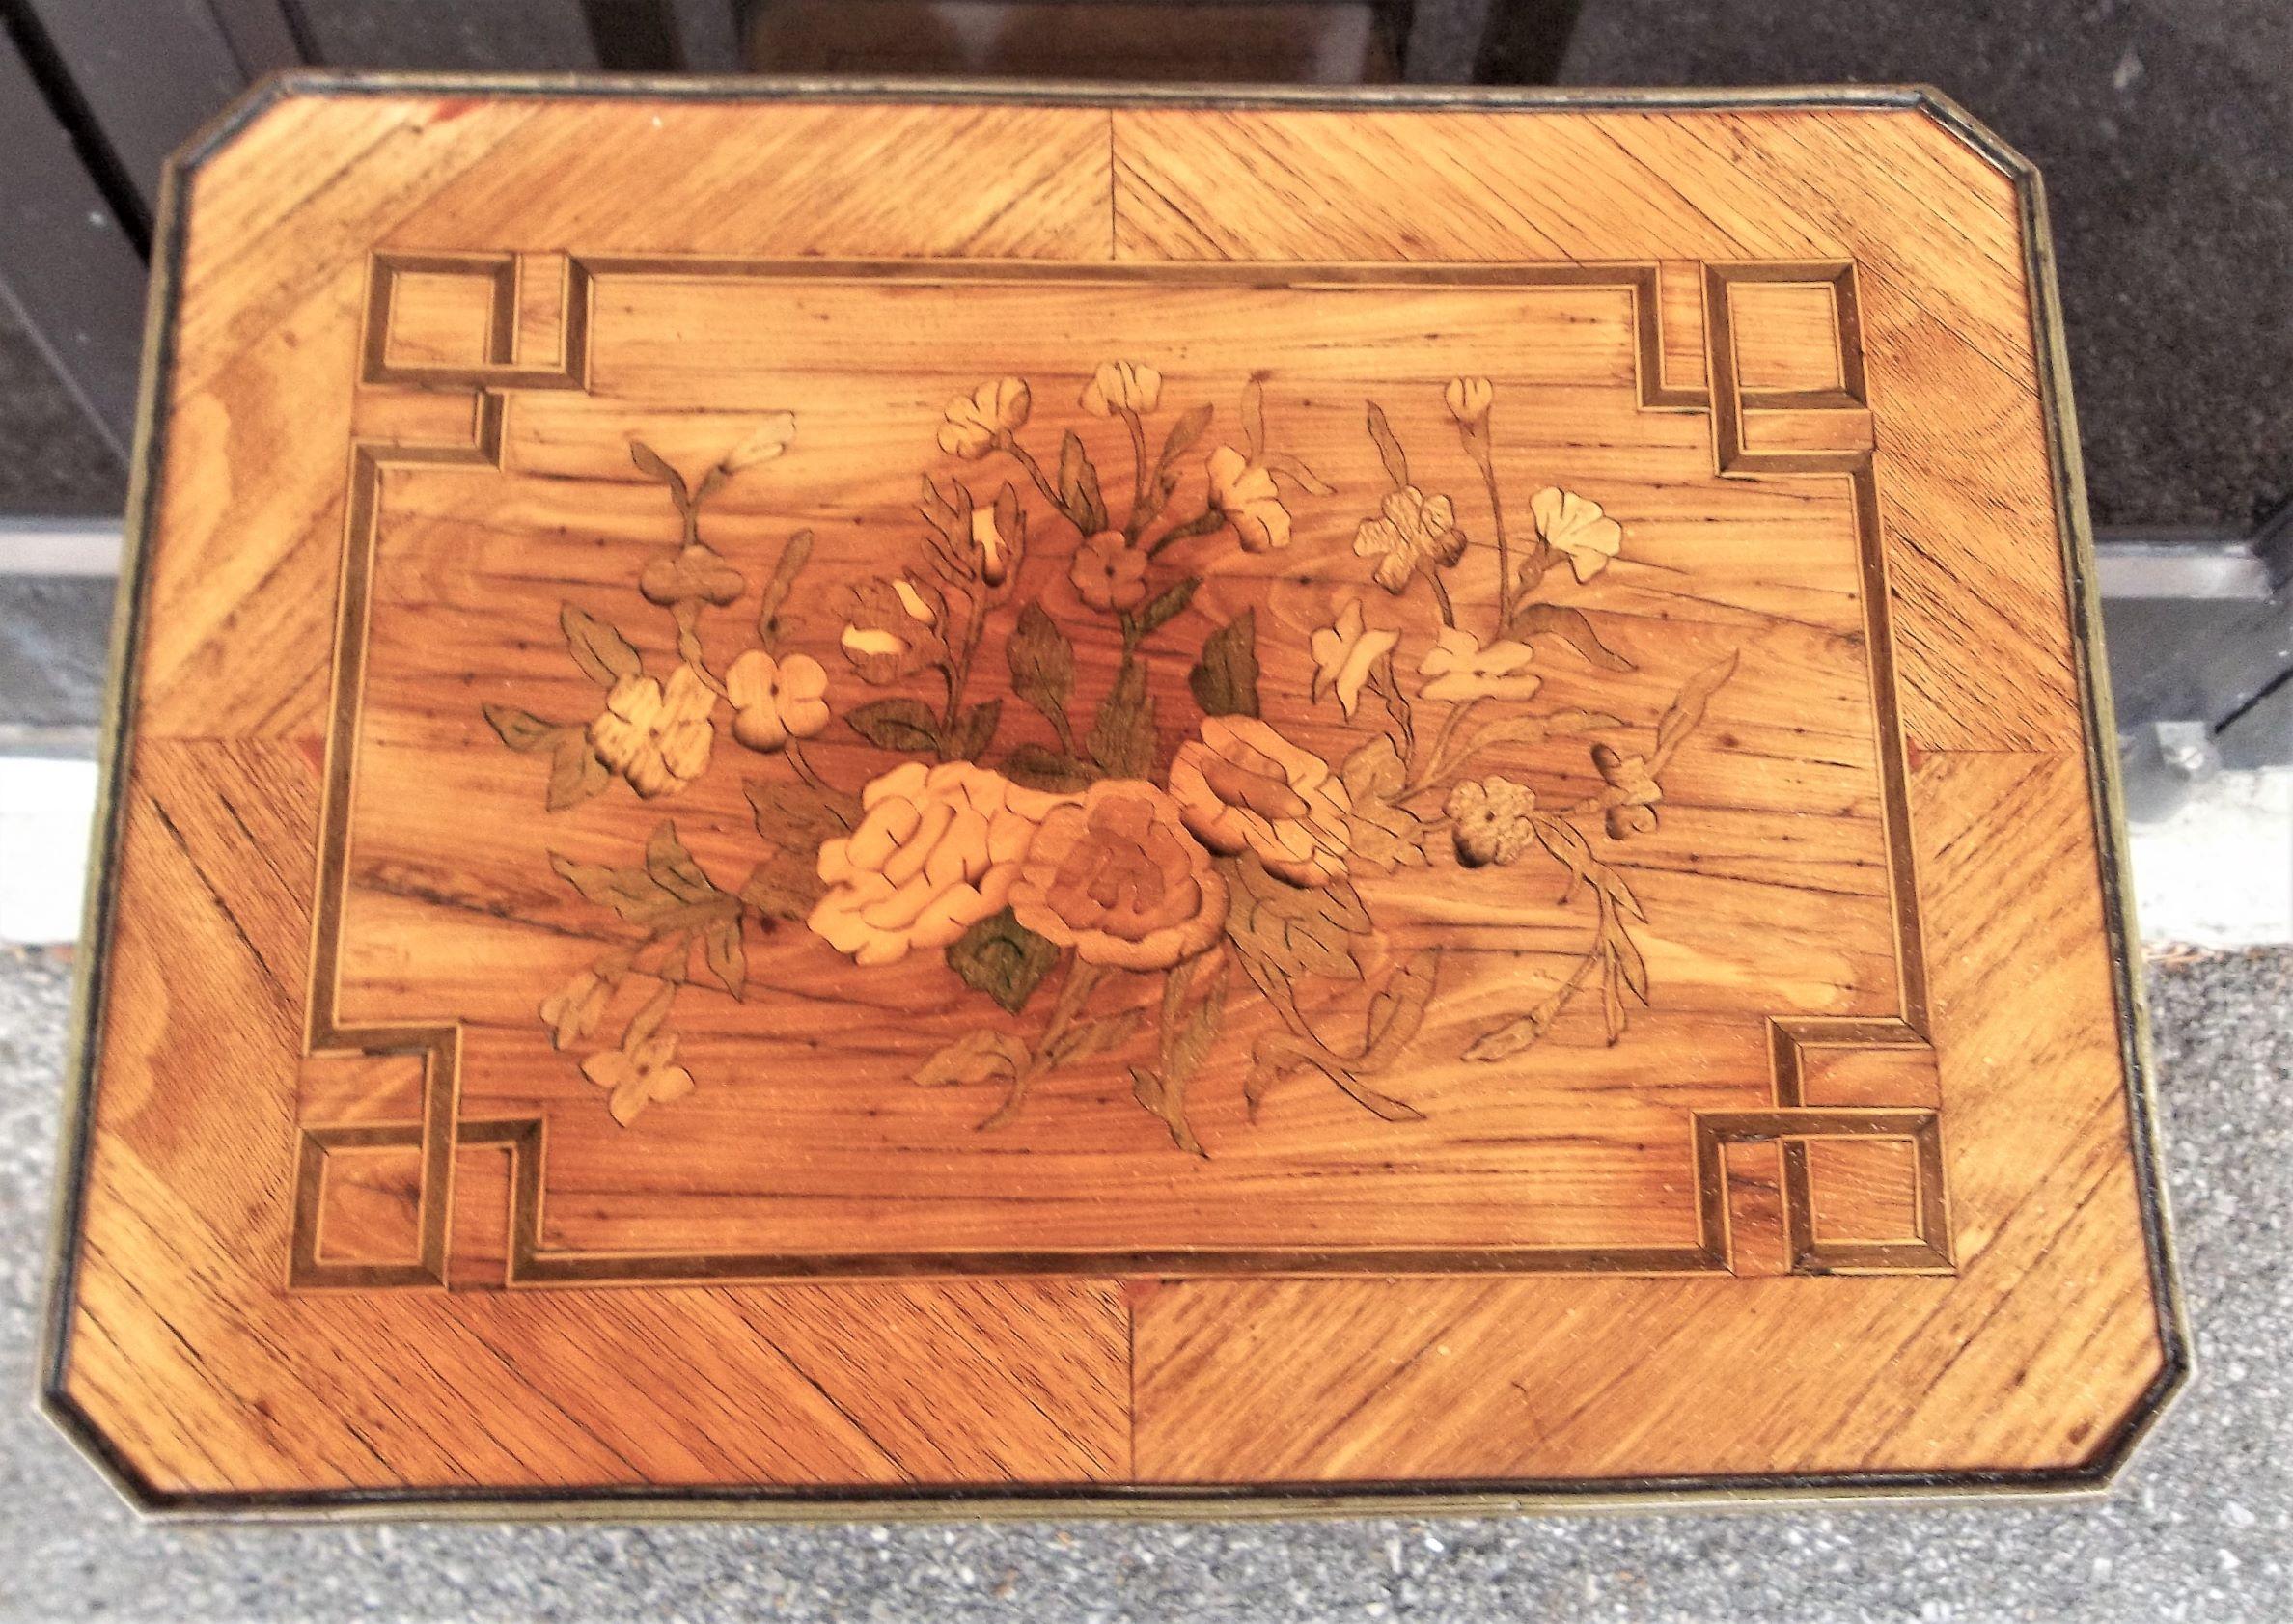 Tulipwood and fruitwoods with the top and stretcher inlaid in a floral marquetry pattern. All four sides with a geometric and stylized rosette inlay. Lovely honey color and patina with a side drawer and frontal slide.

Fading, minor wood losses,